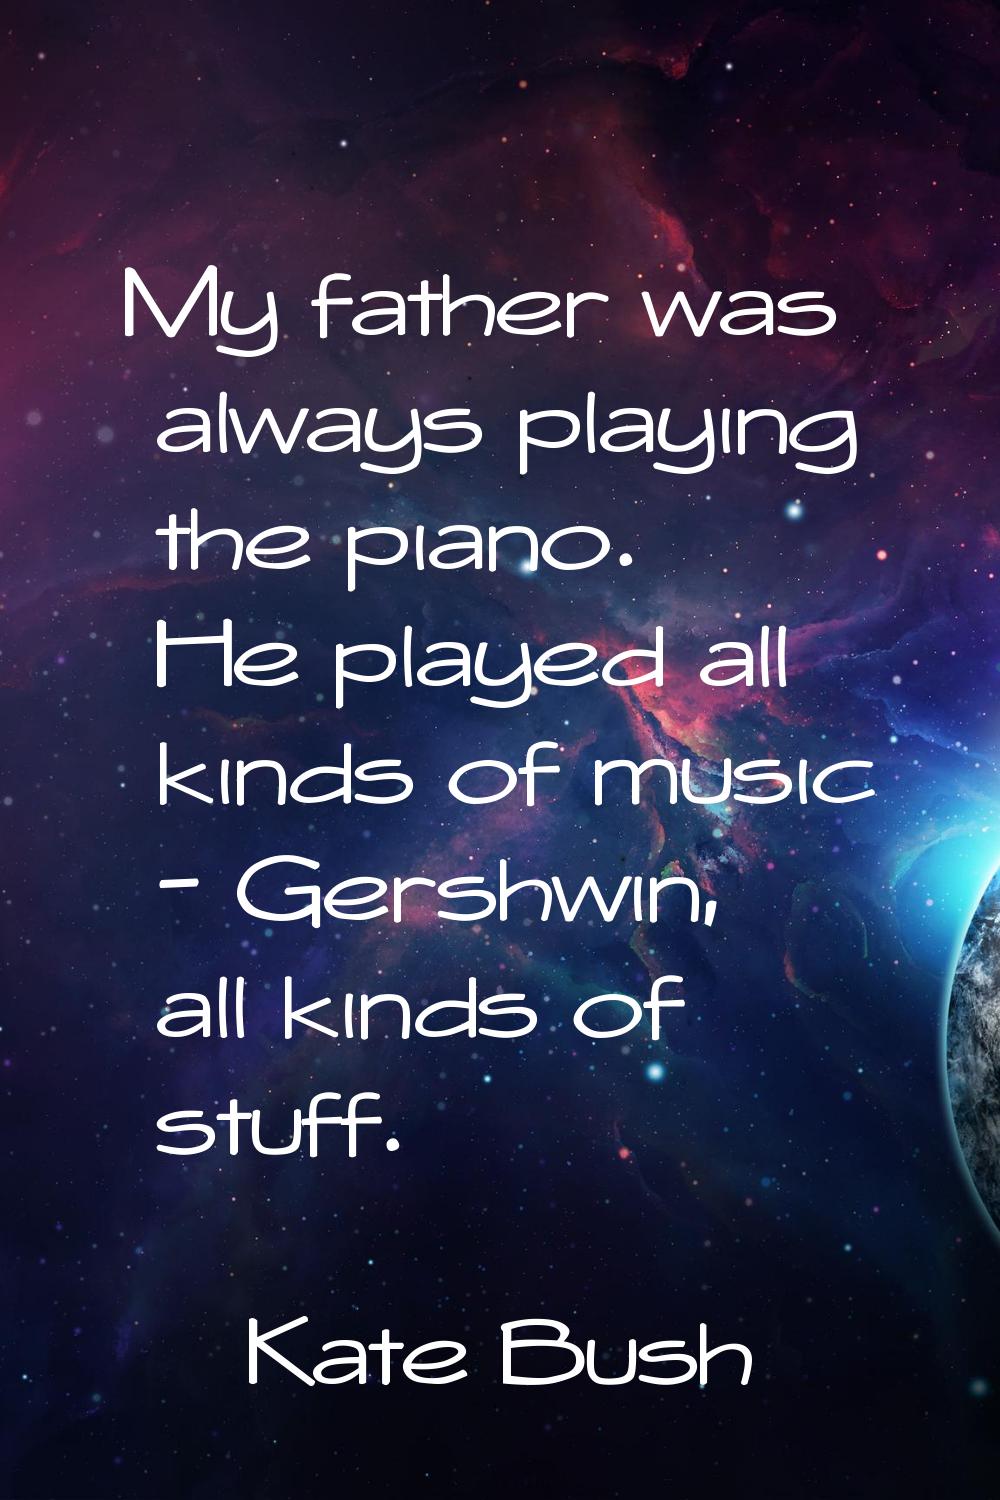 My father was always playing the piano. He played all kinds of music - Gershwin, all kinds of stuff